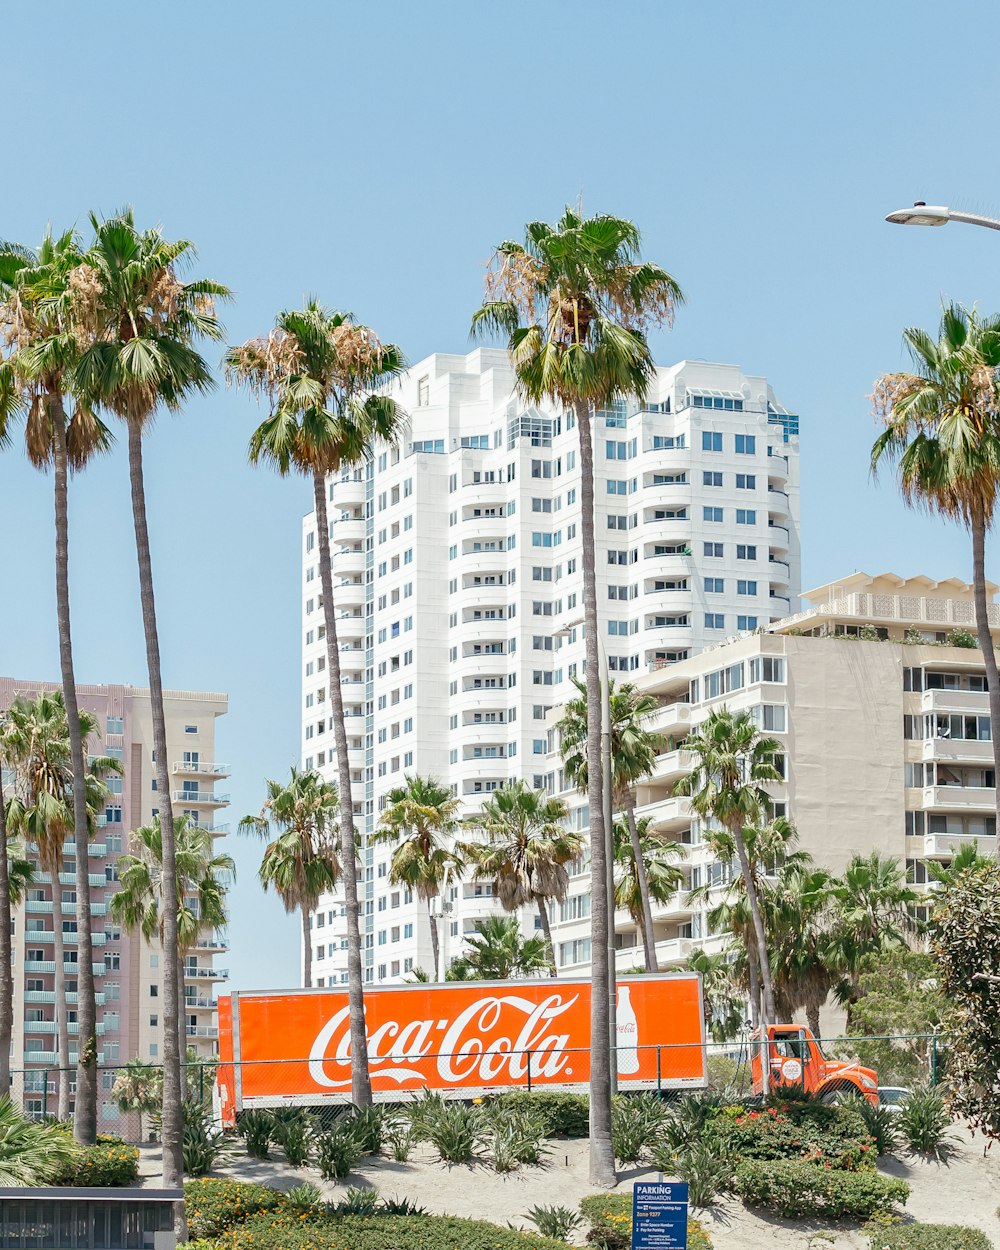 a coca - cola sign in front of palm trees and buildings